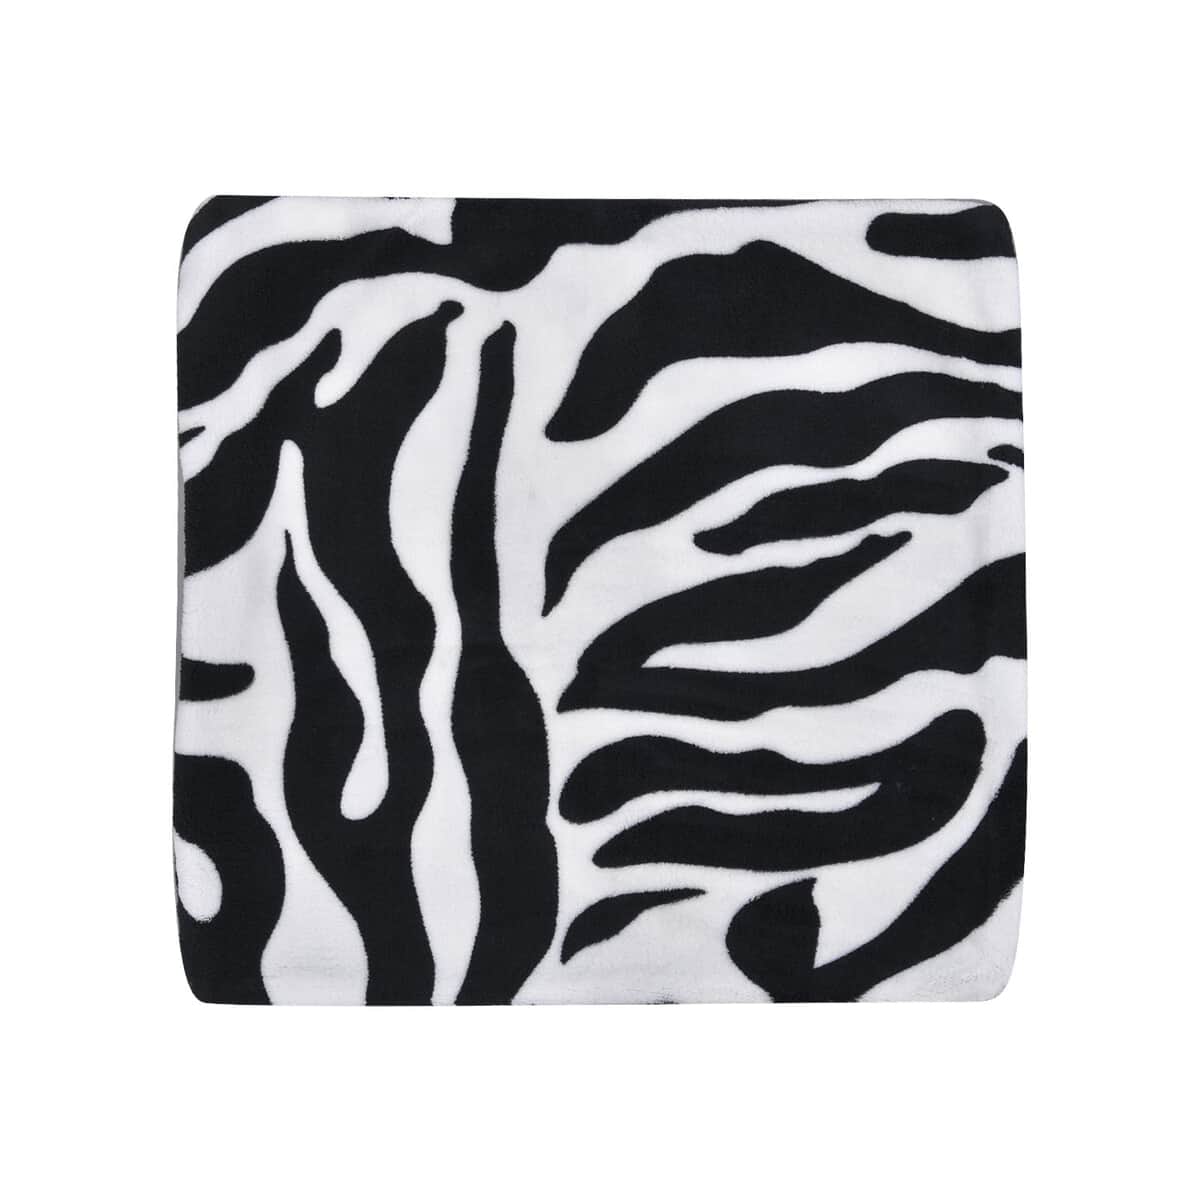 Homesmart Black & White Color Zebra Stripe Pattern Microfiber Coral Fleece Blanket (59.05x78.74) with 2 Cushion Covers image number 1